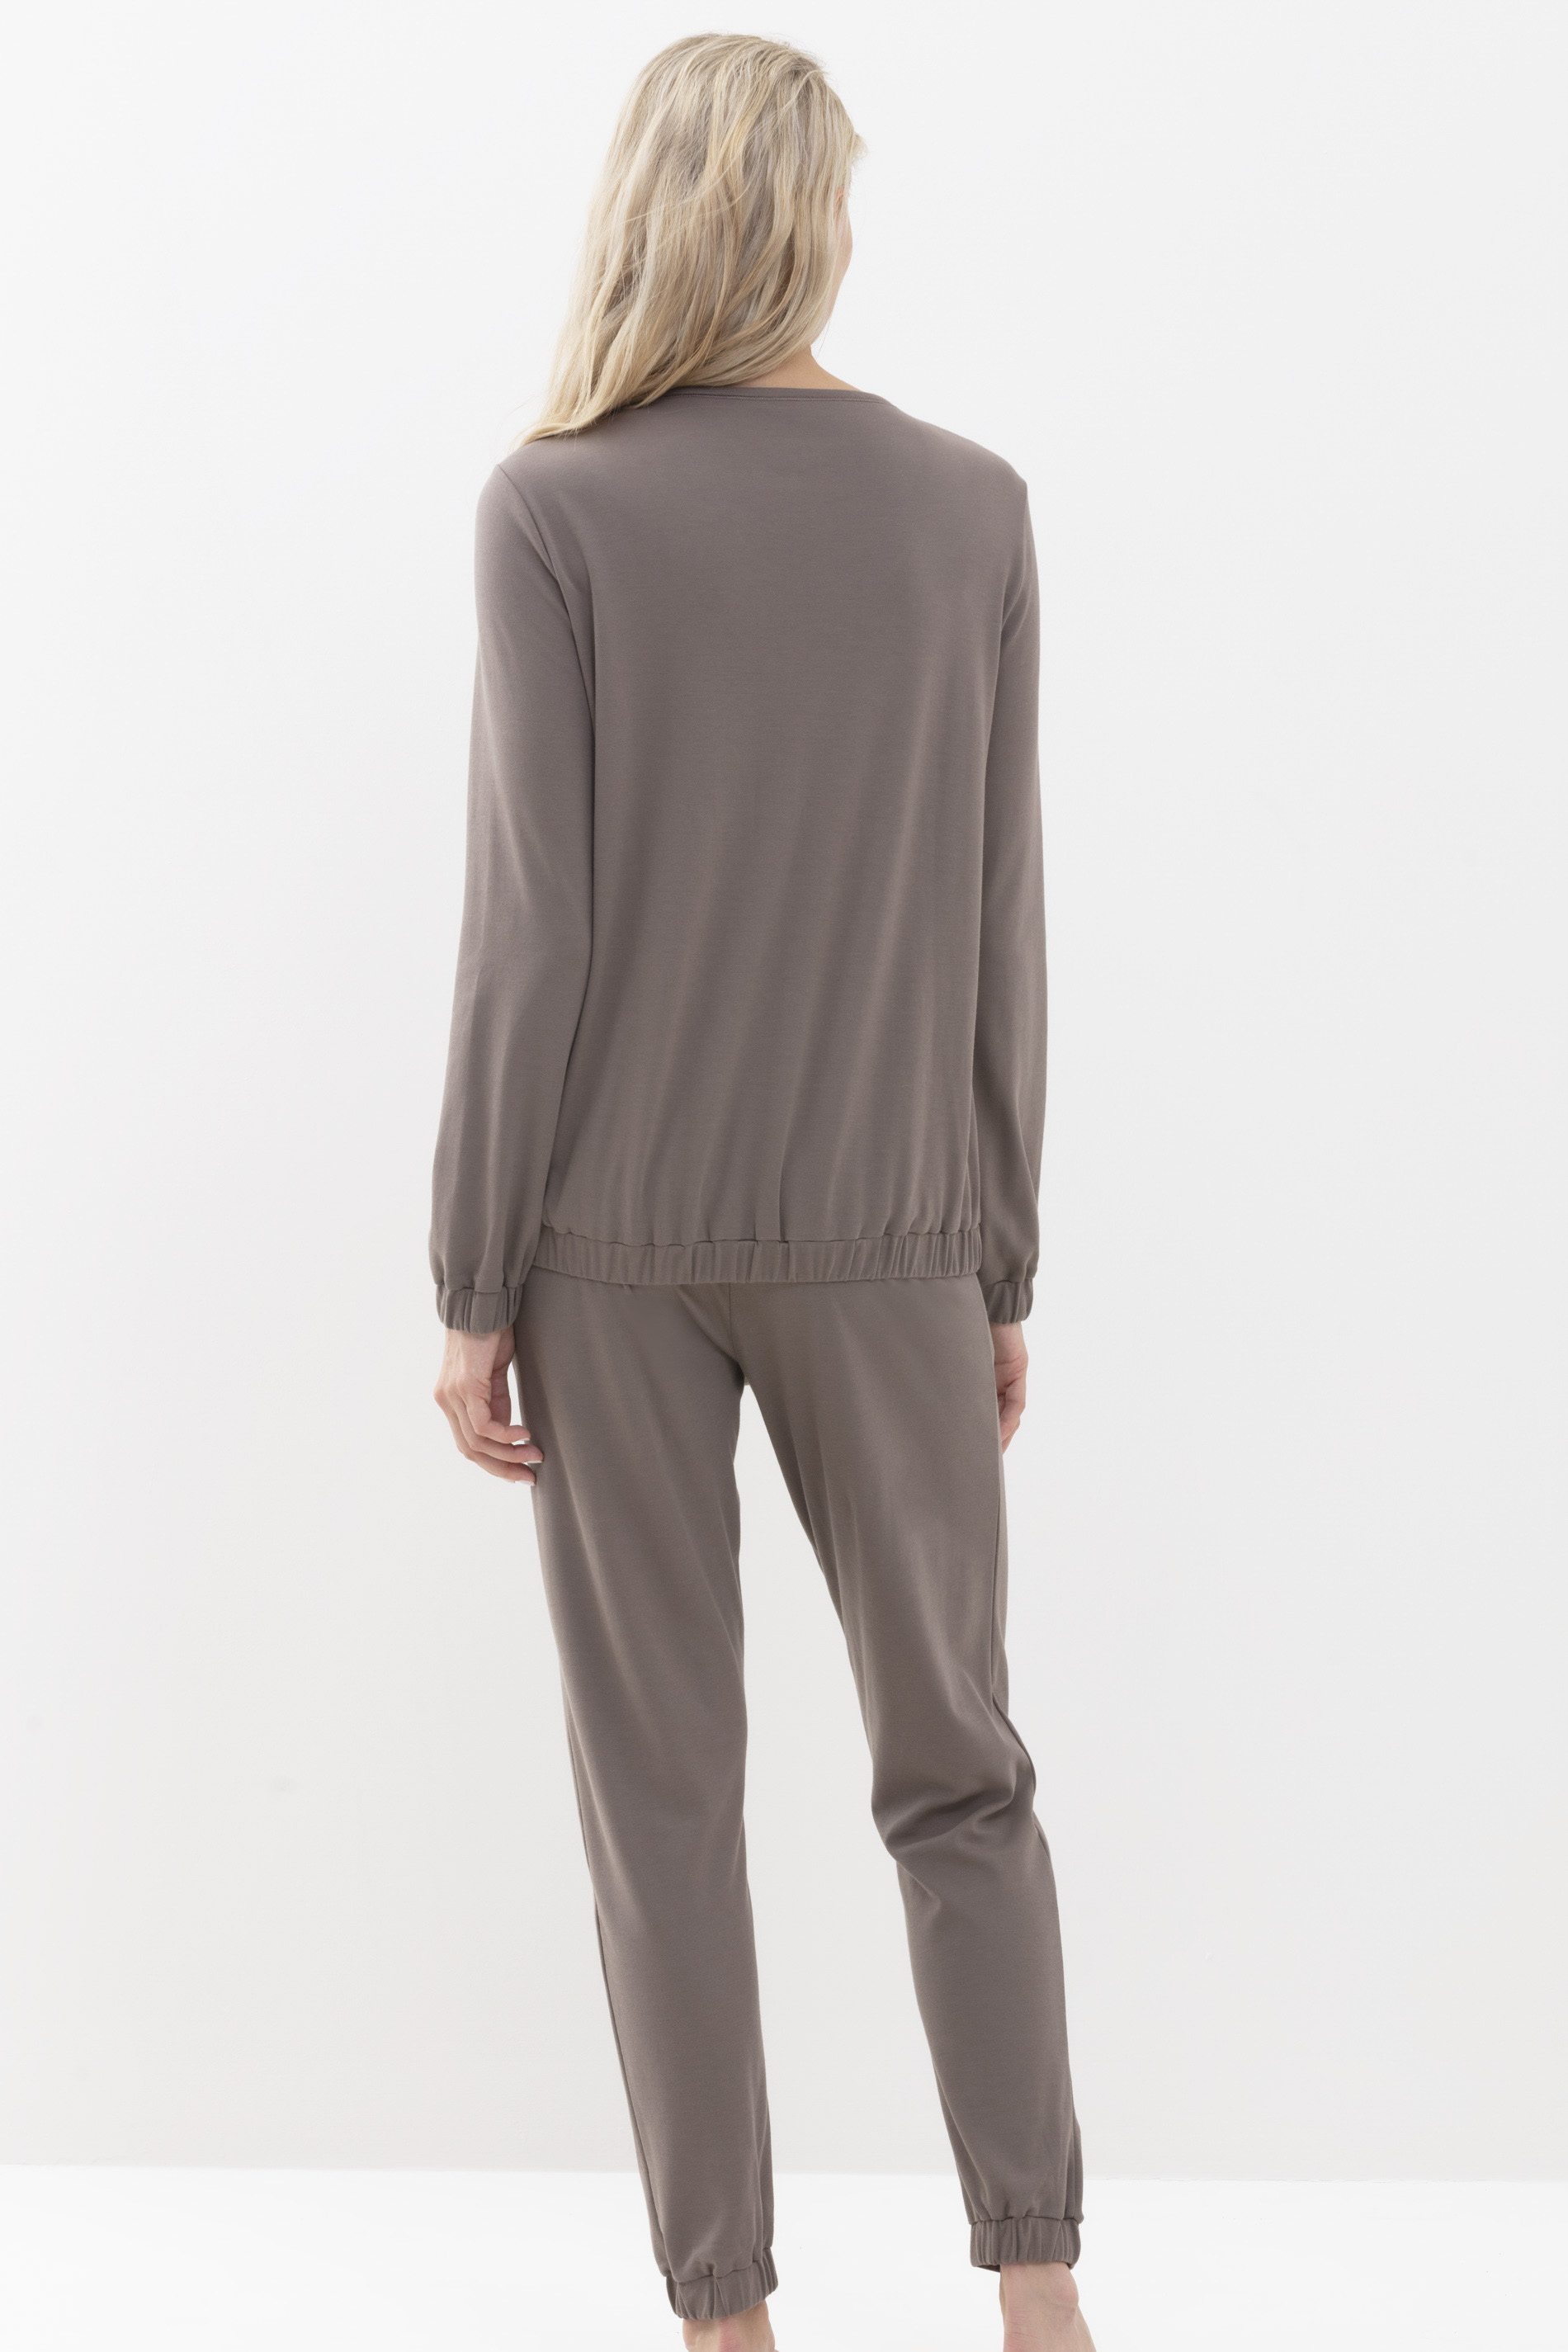 Shirt with full-length sleeves Deep Taupe Serie N8TEX 2.0 Rear View | mey®